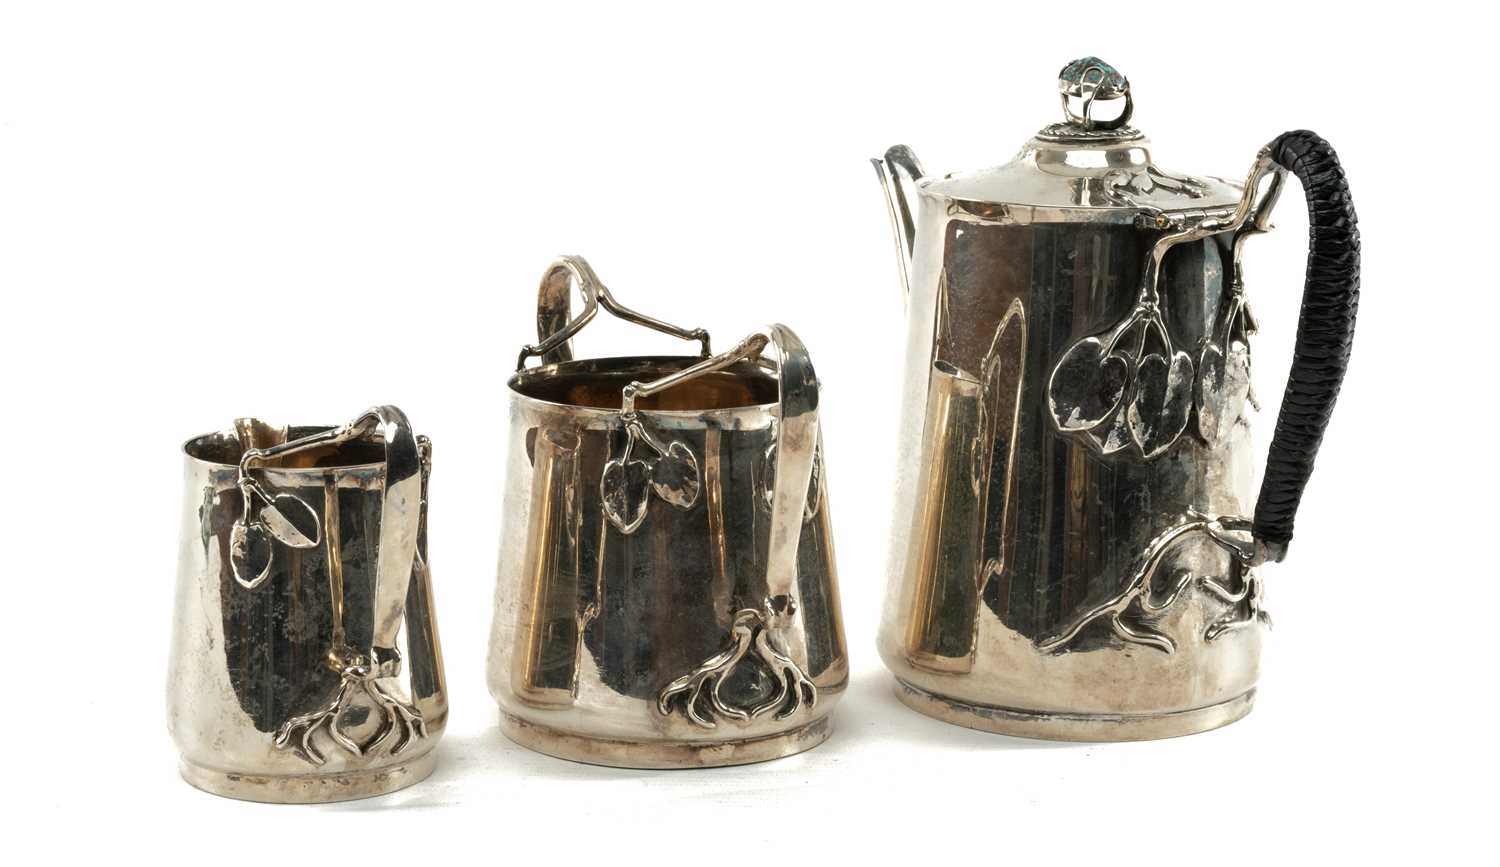 RARE SCOTTISH ARTS & CRAFTS SILVER COFFEE SERVICE each element cylindrical, tapered and with